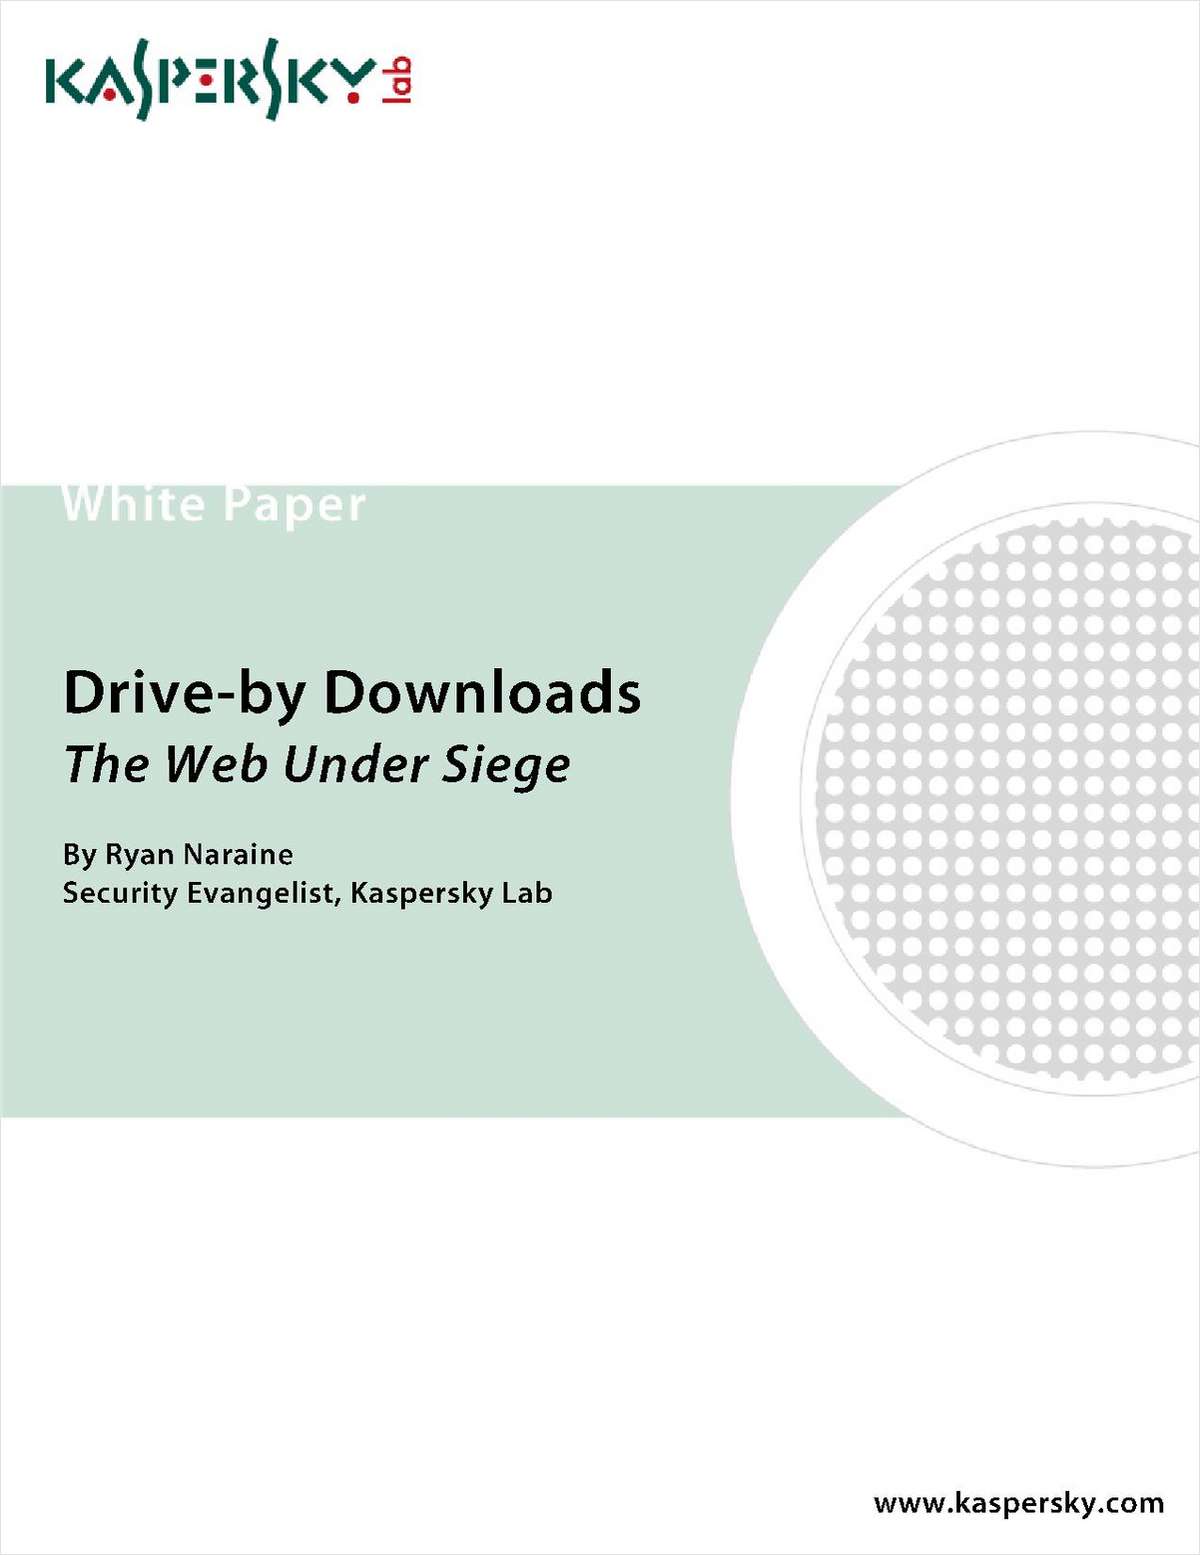 Drive-by Downloads—The Web Under Siege